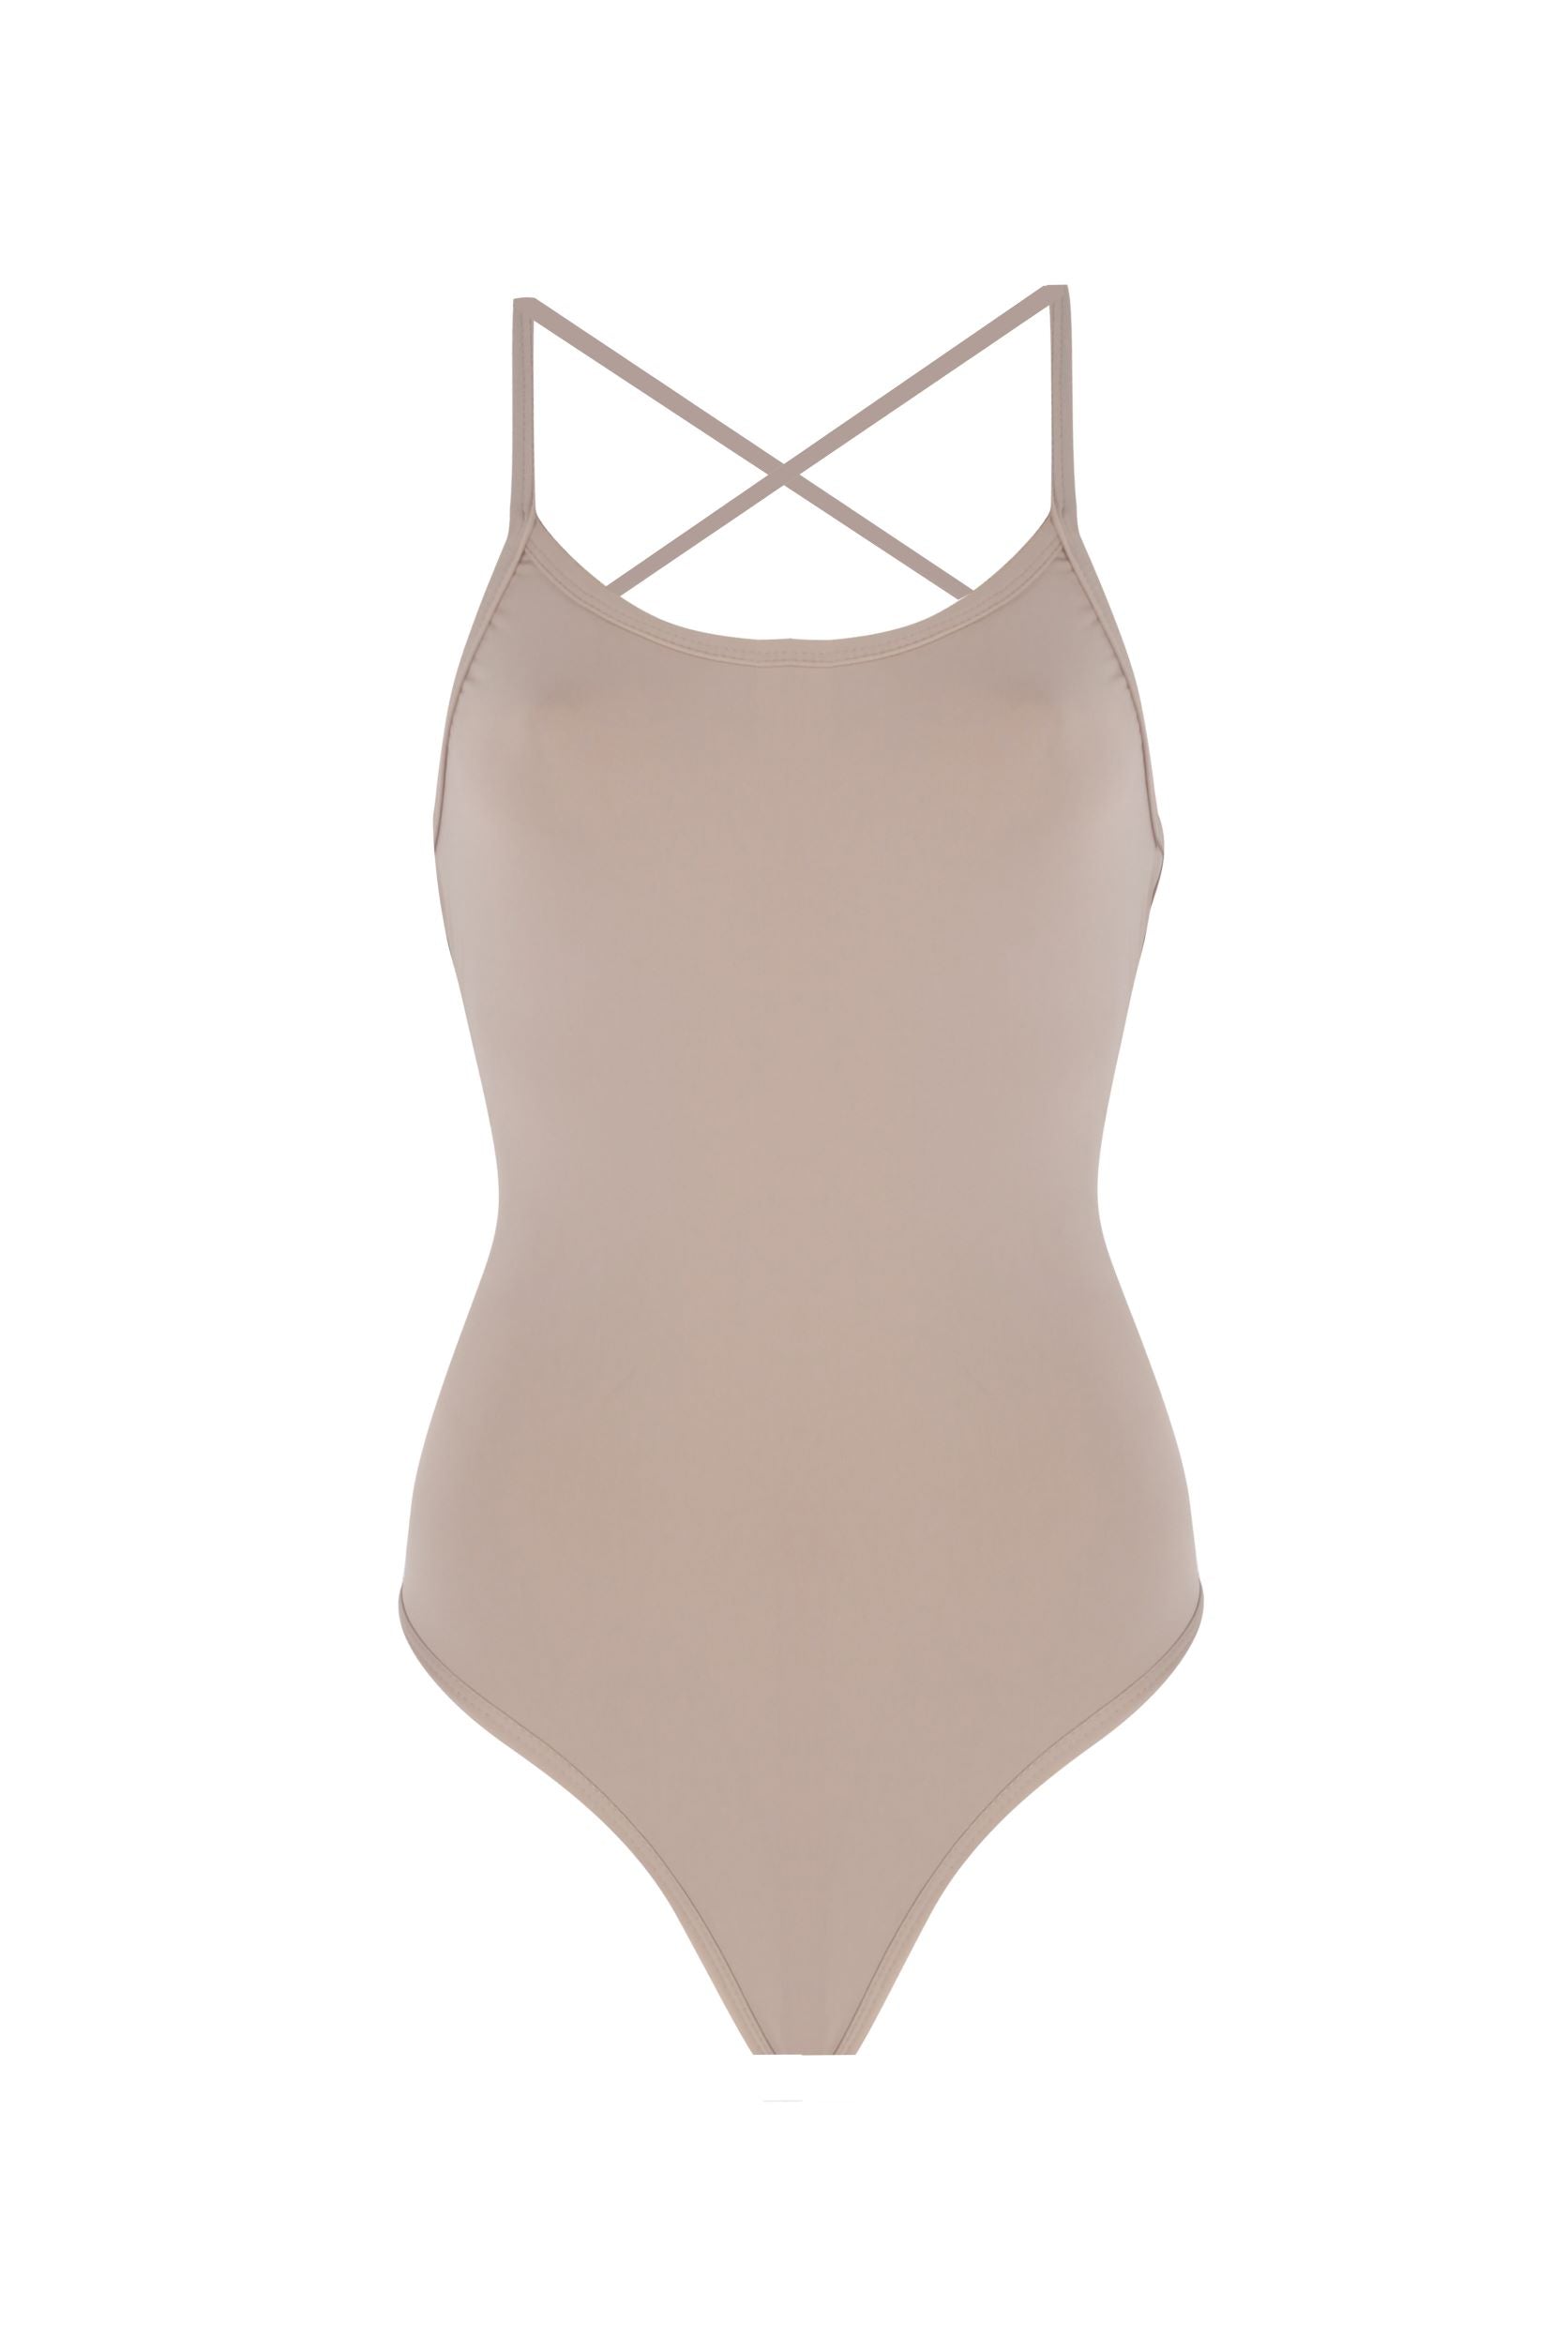 Women's Racer Swimsuit - Neutrals Extra Small Yorstruly